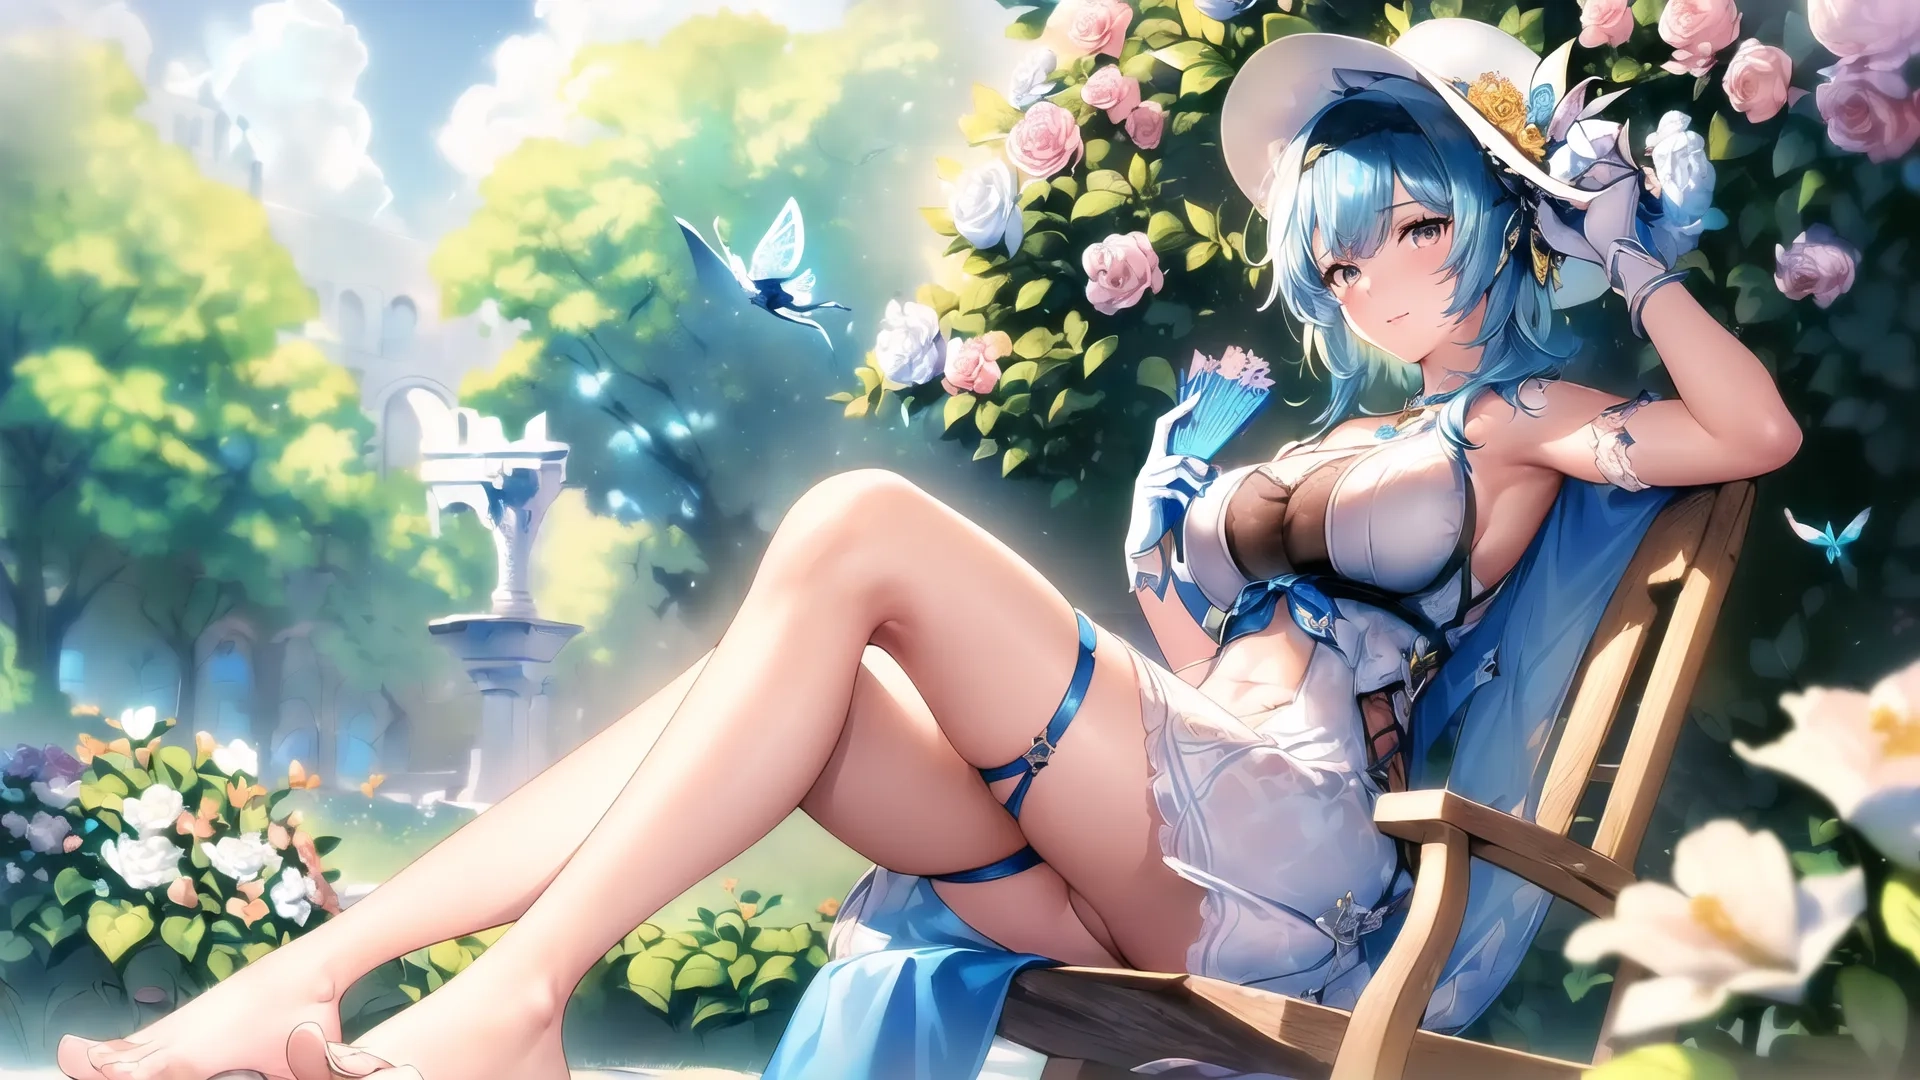 a woman with blue hair and bikini shirt in a lawn chair outdoors surrounded by flowers and birds watching from her knees and holding a drink glass of water
